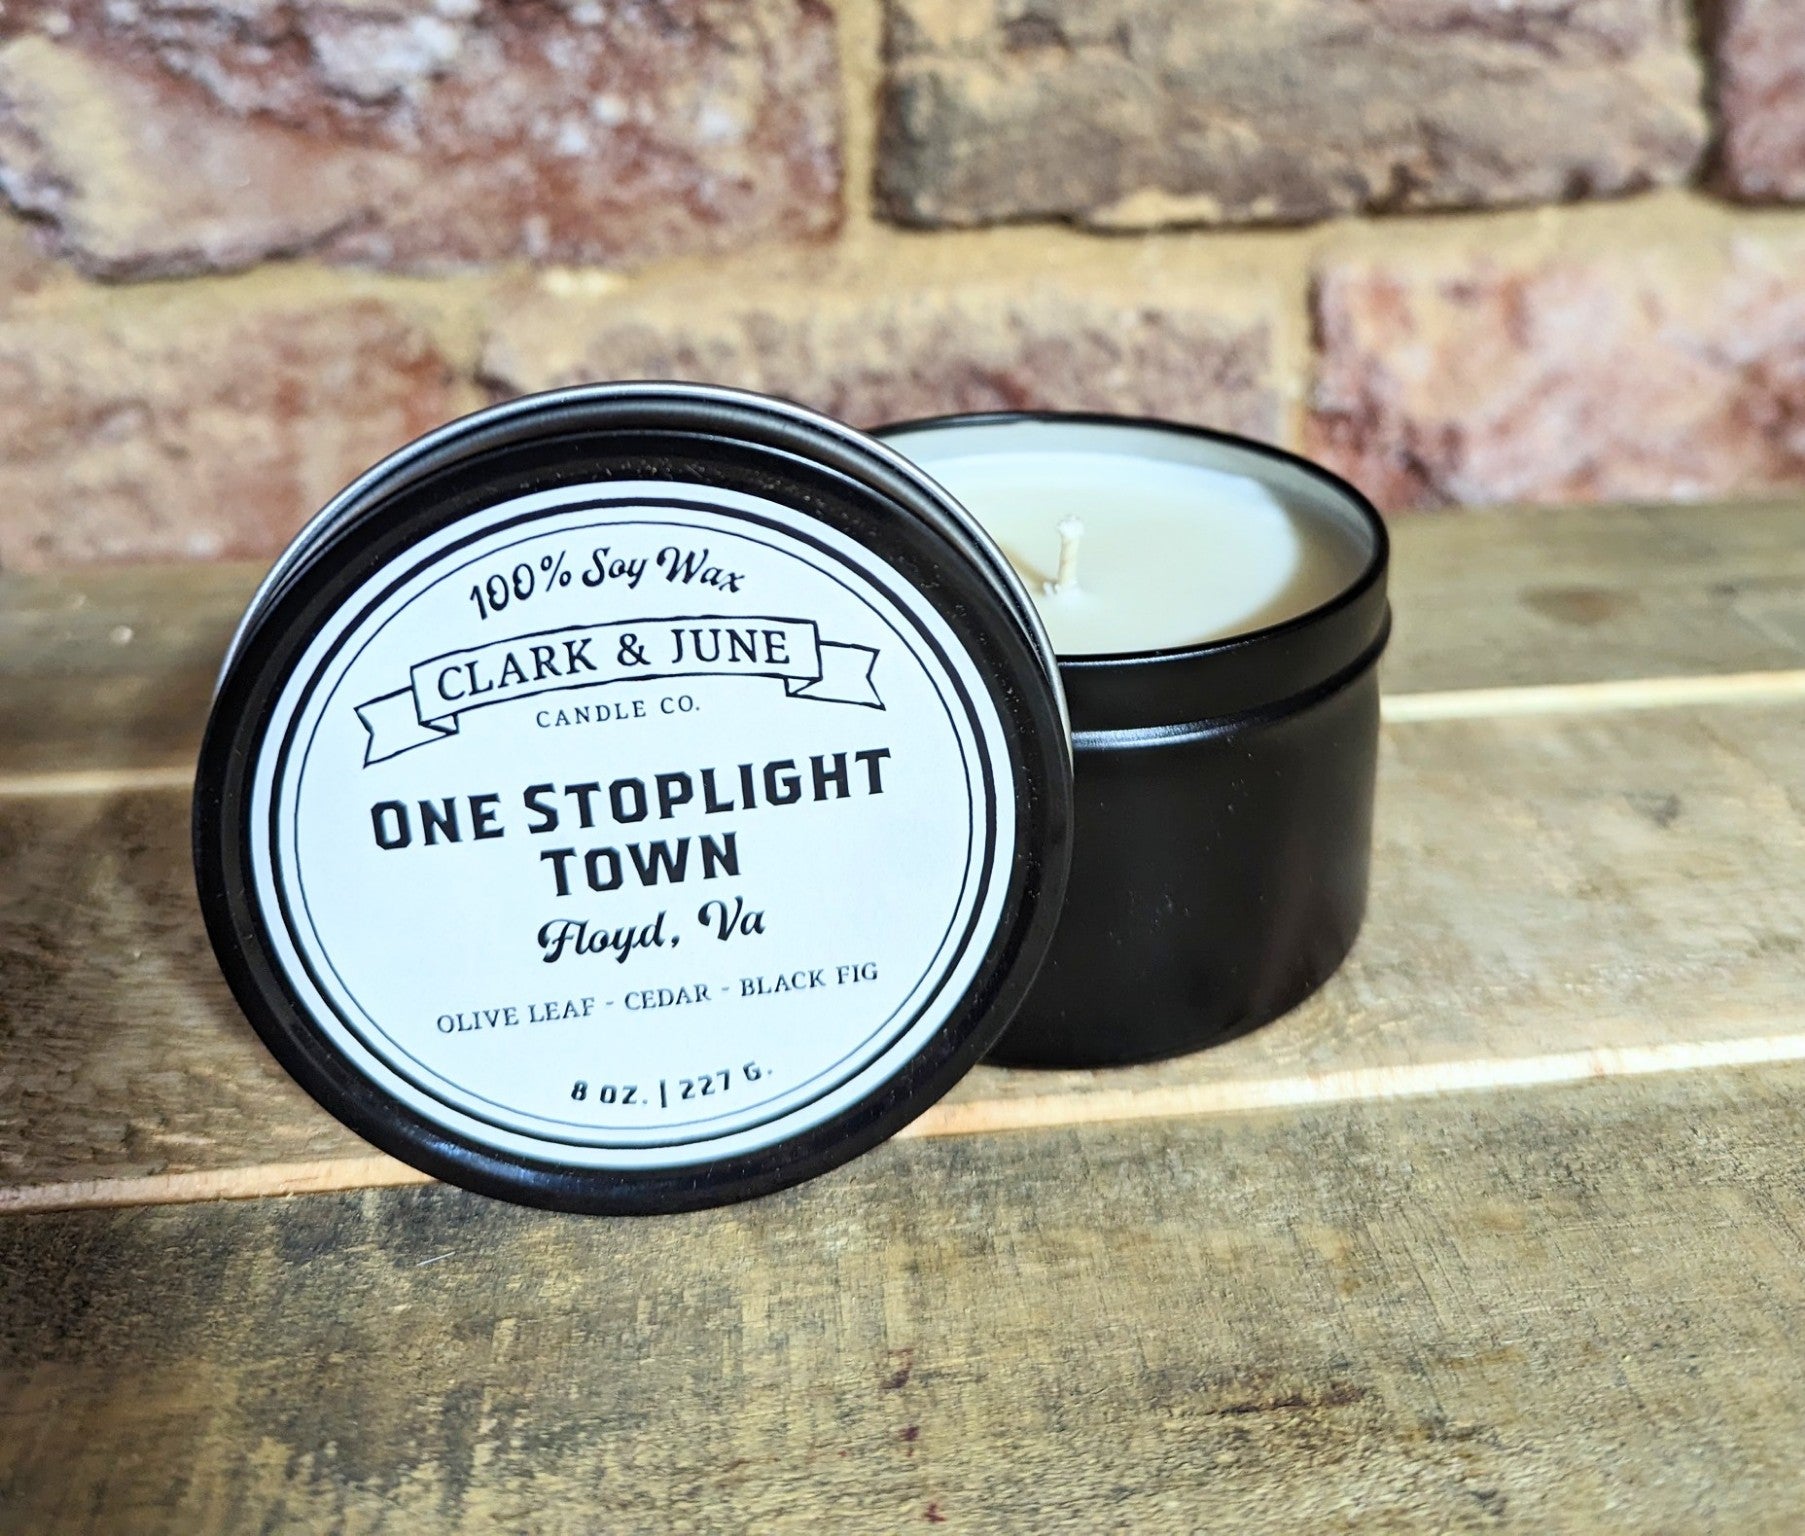 One Stoplight Town Tin Candle